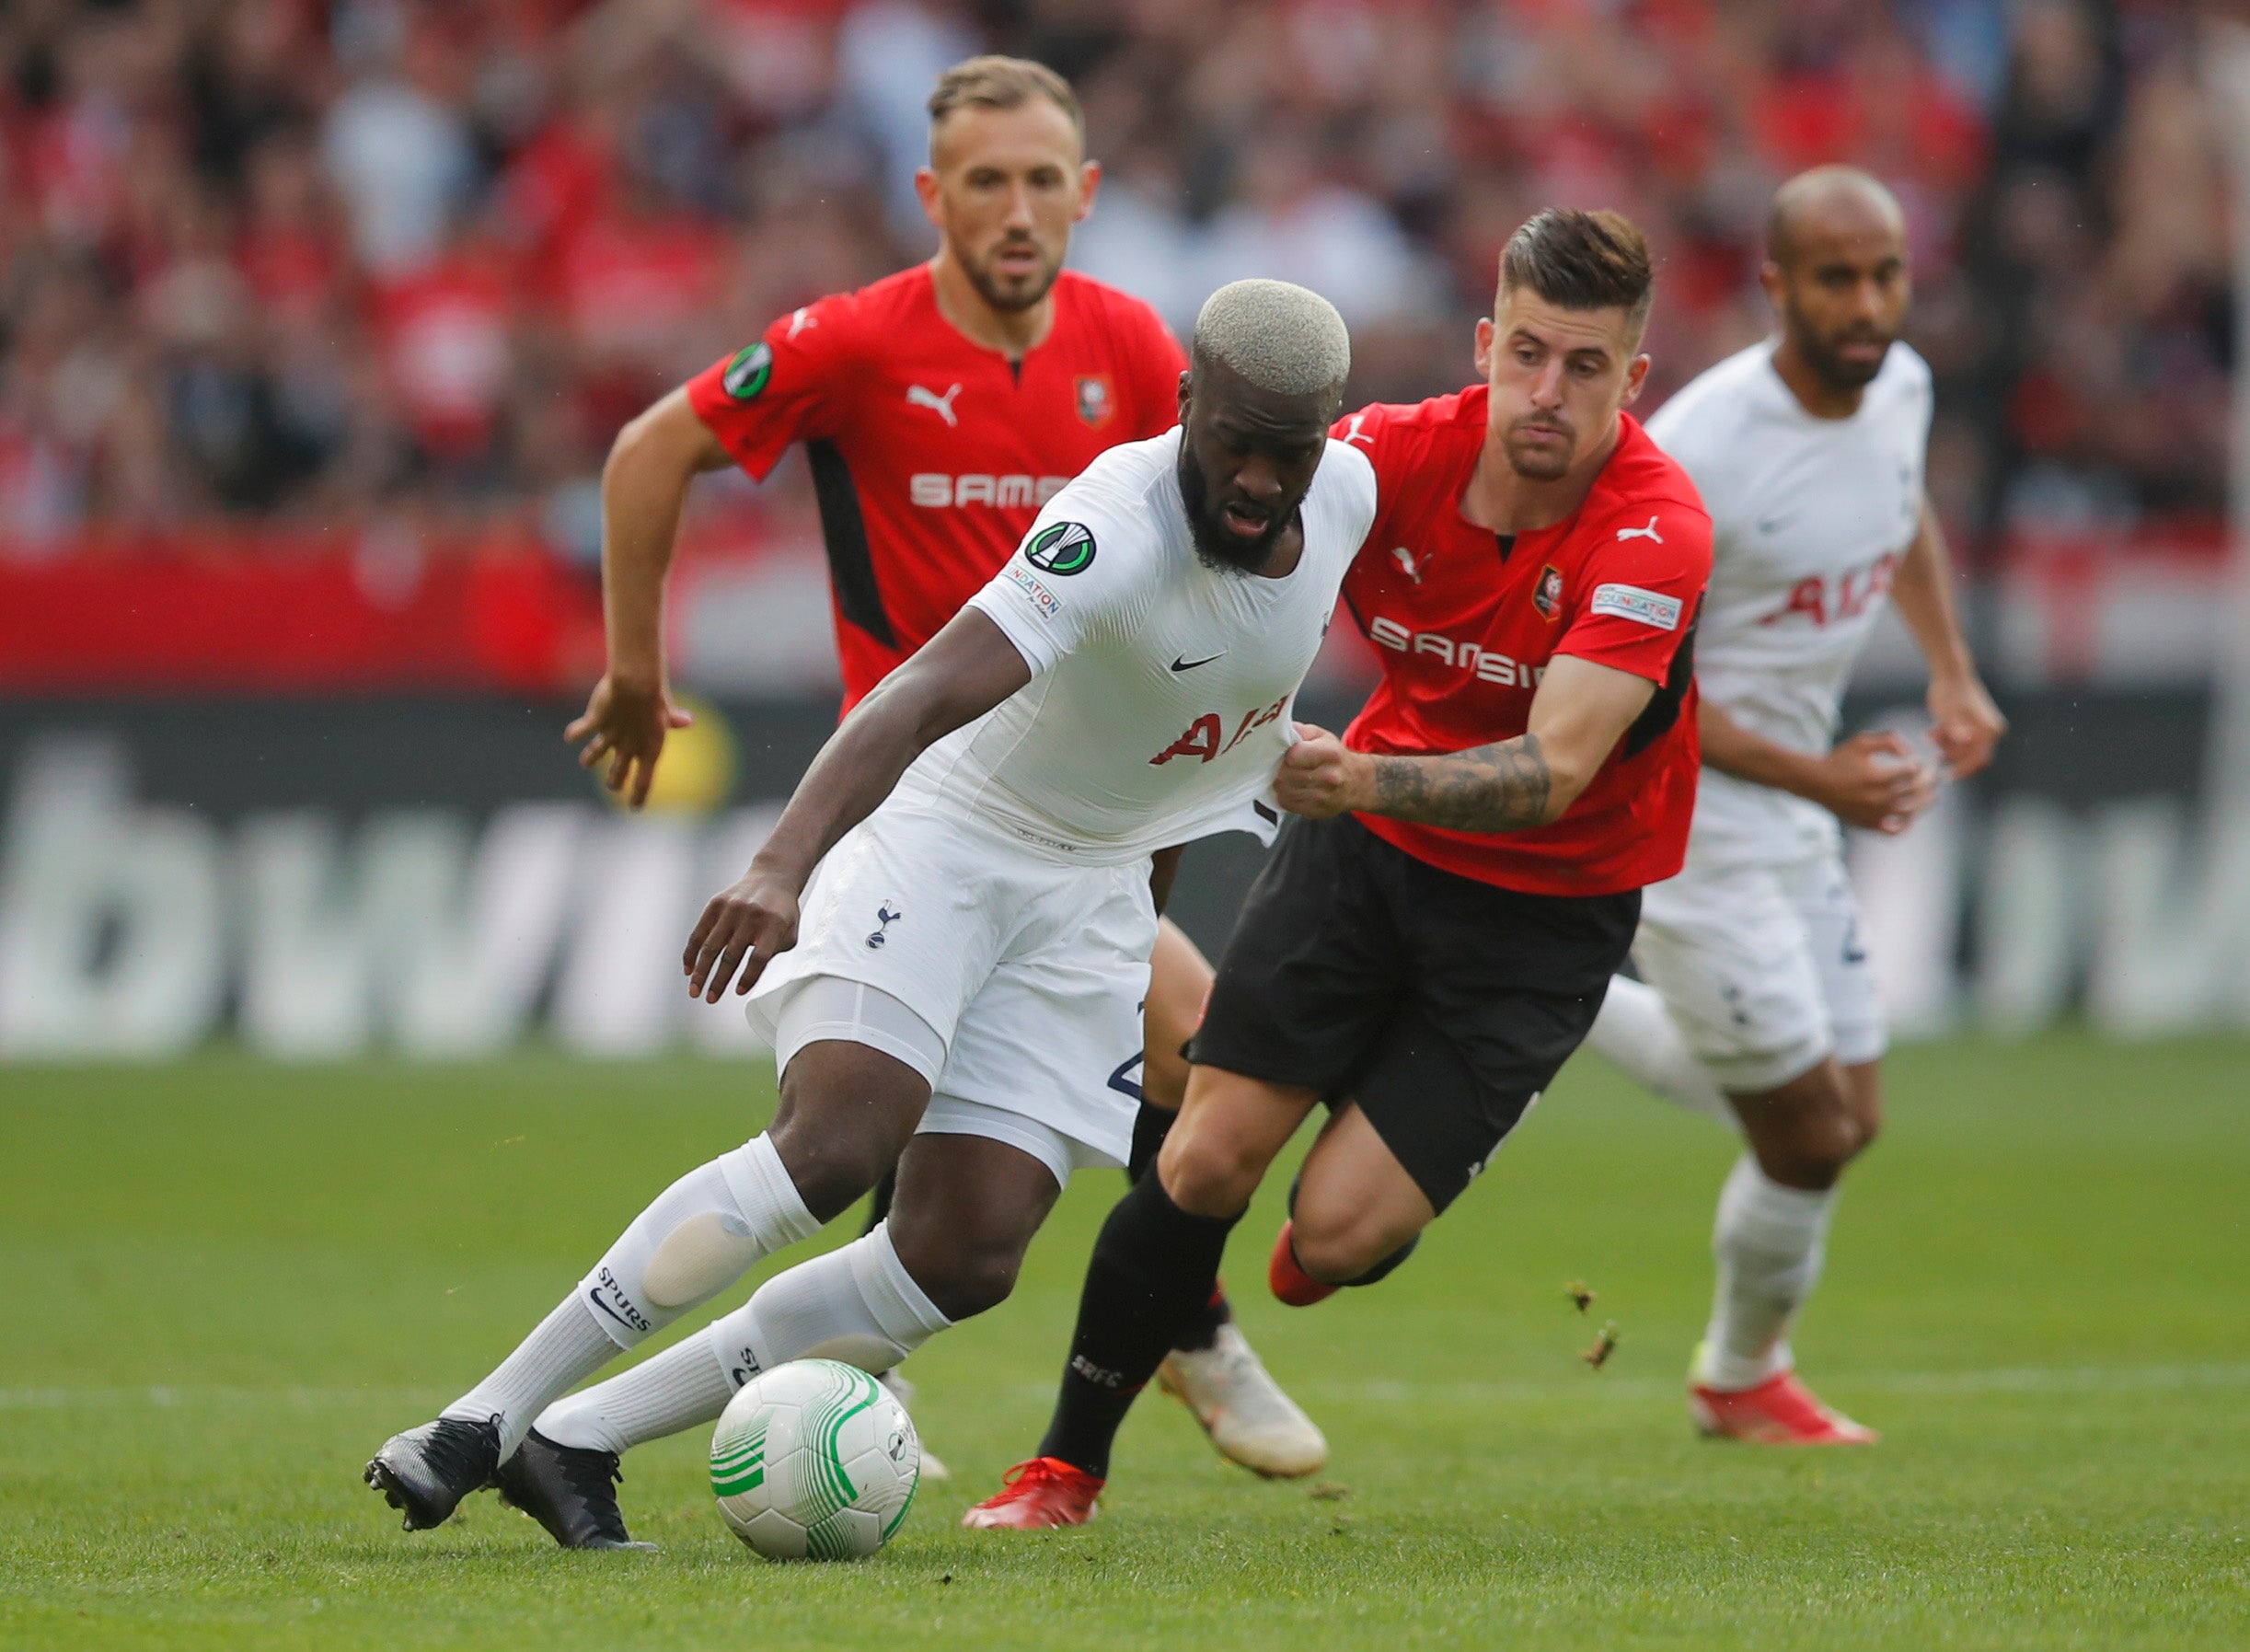 Ndombele played his first game of the season on Thursday evening